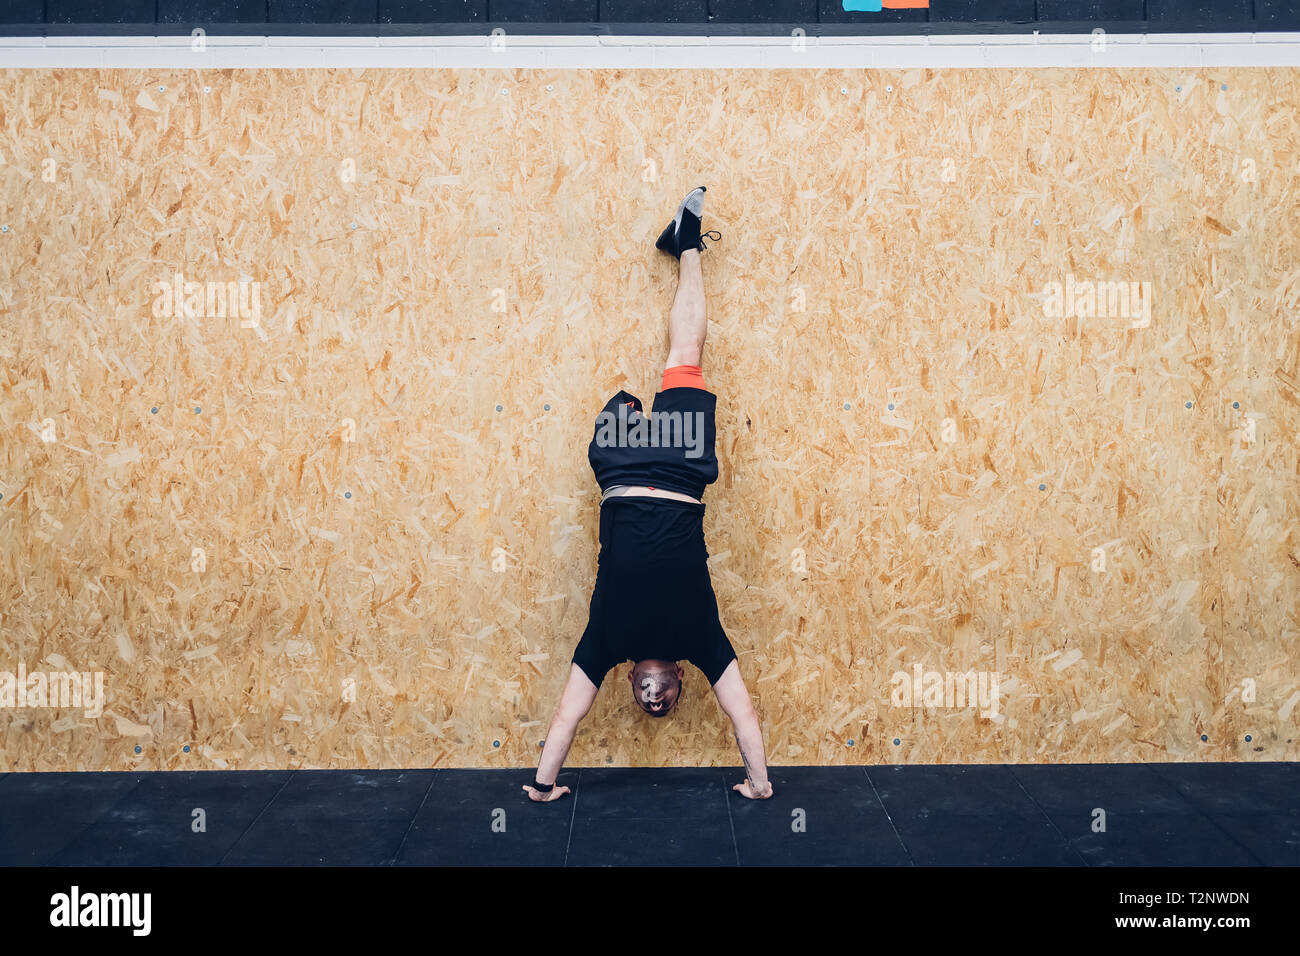 Man with disability doing handstand against chipboard wall Stock Photo